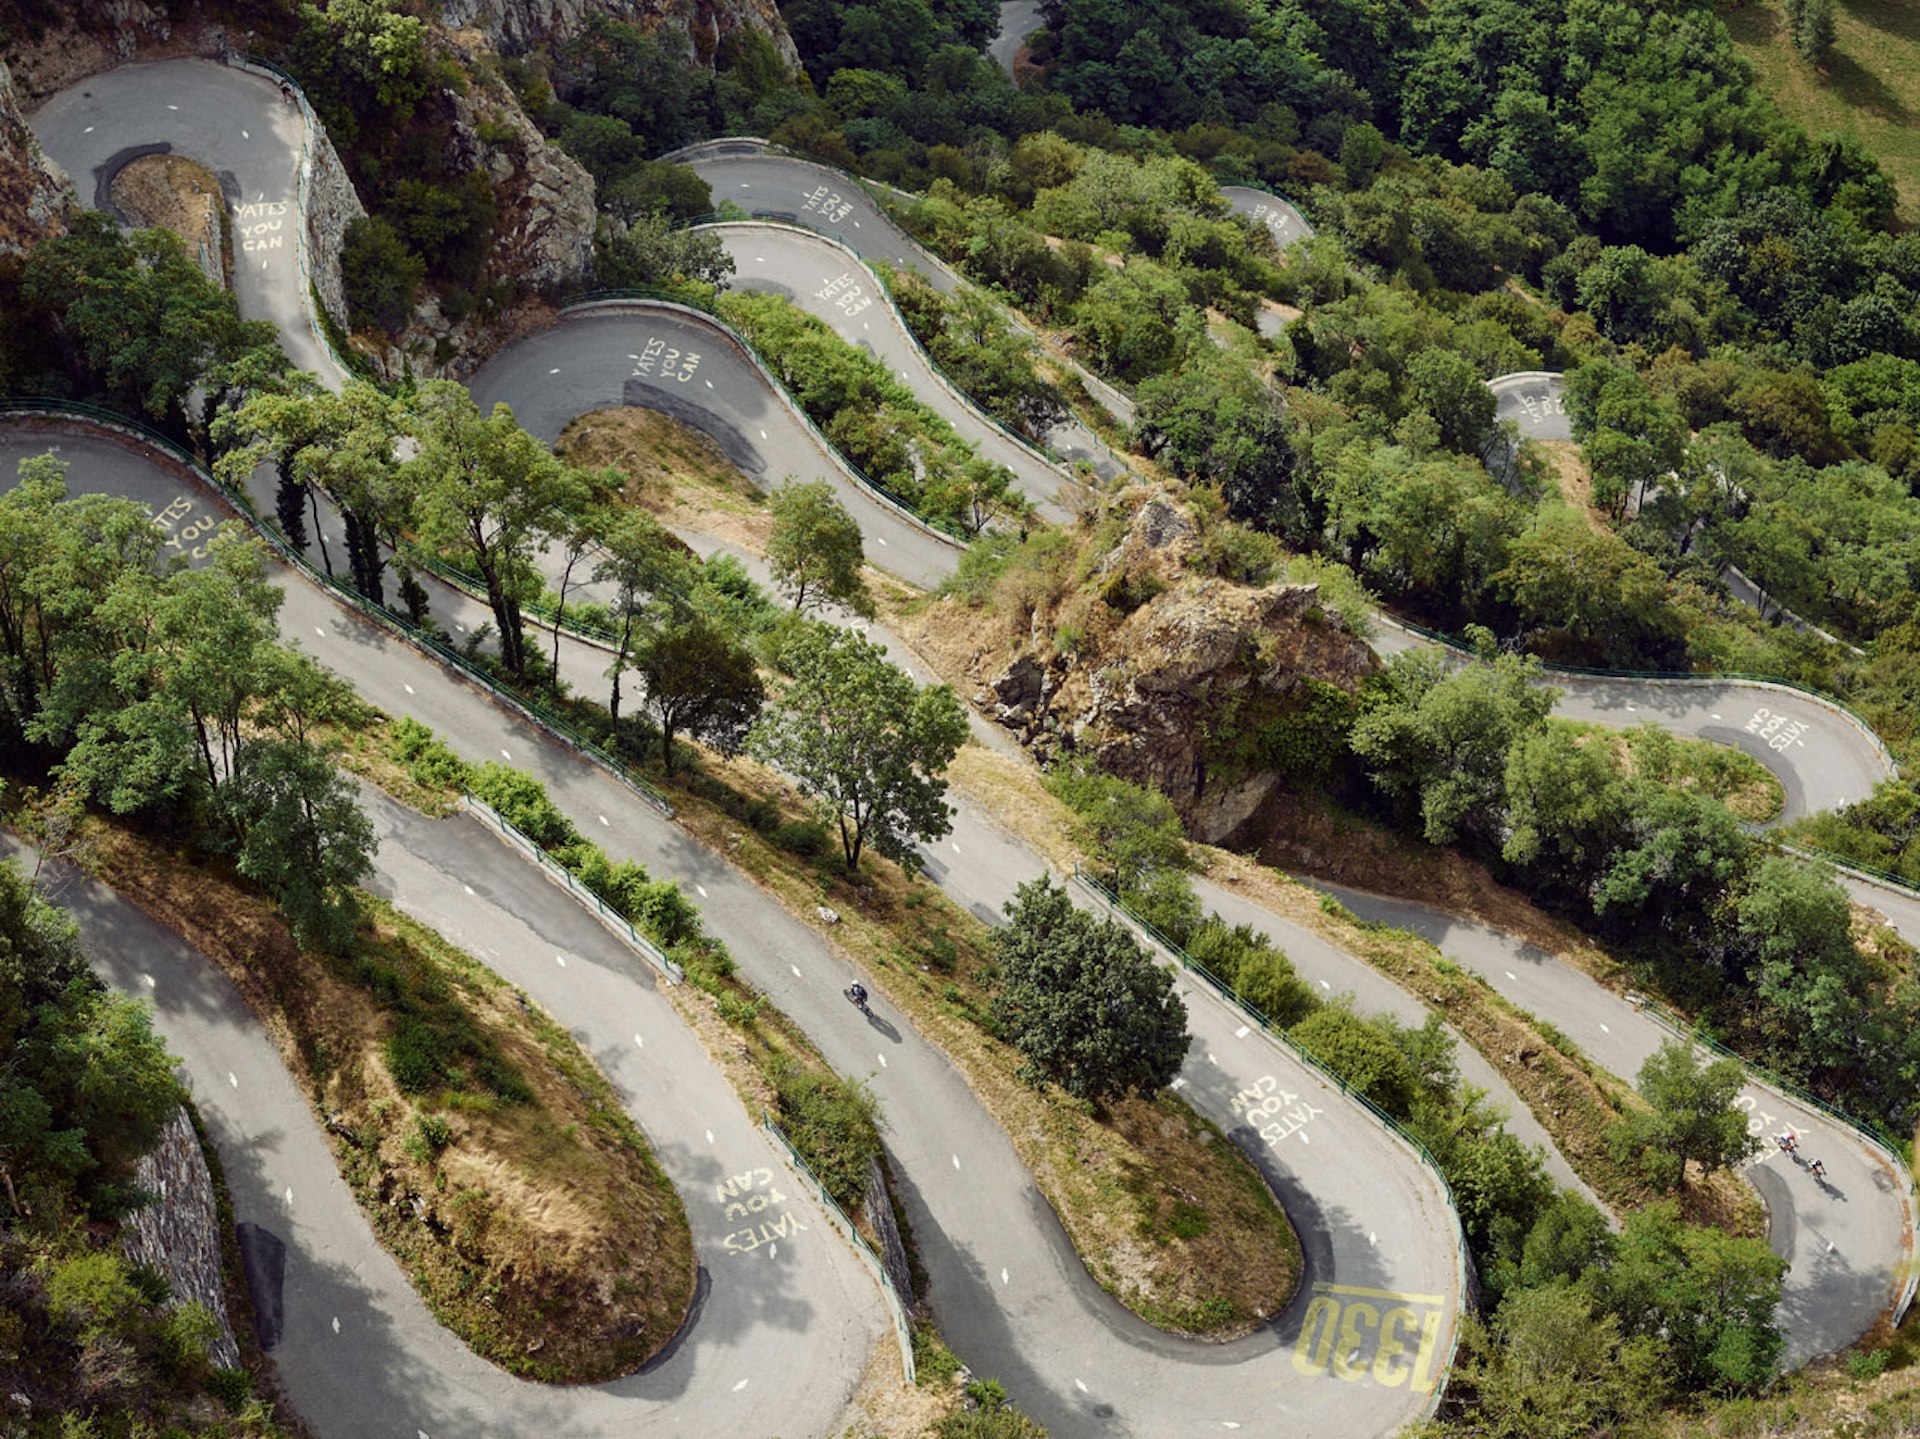 Lacets de Montvernier: sometimes described as an Alpine Scalextric, the climb has eighteen hairpins that switch back every 150m